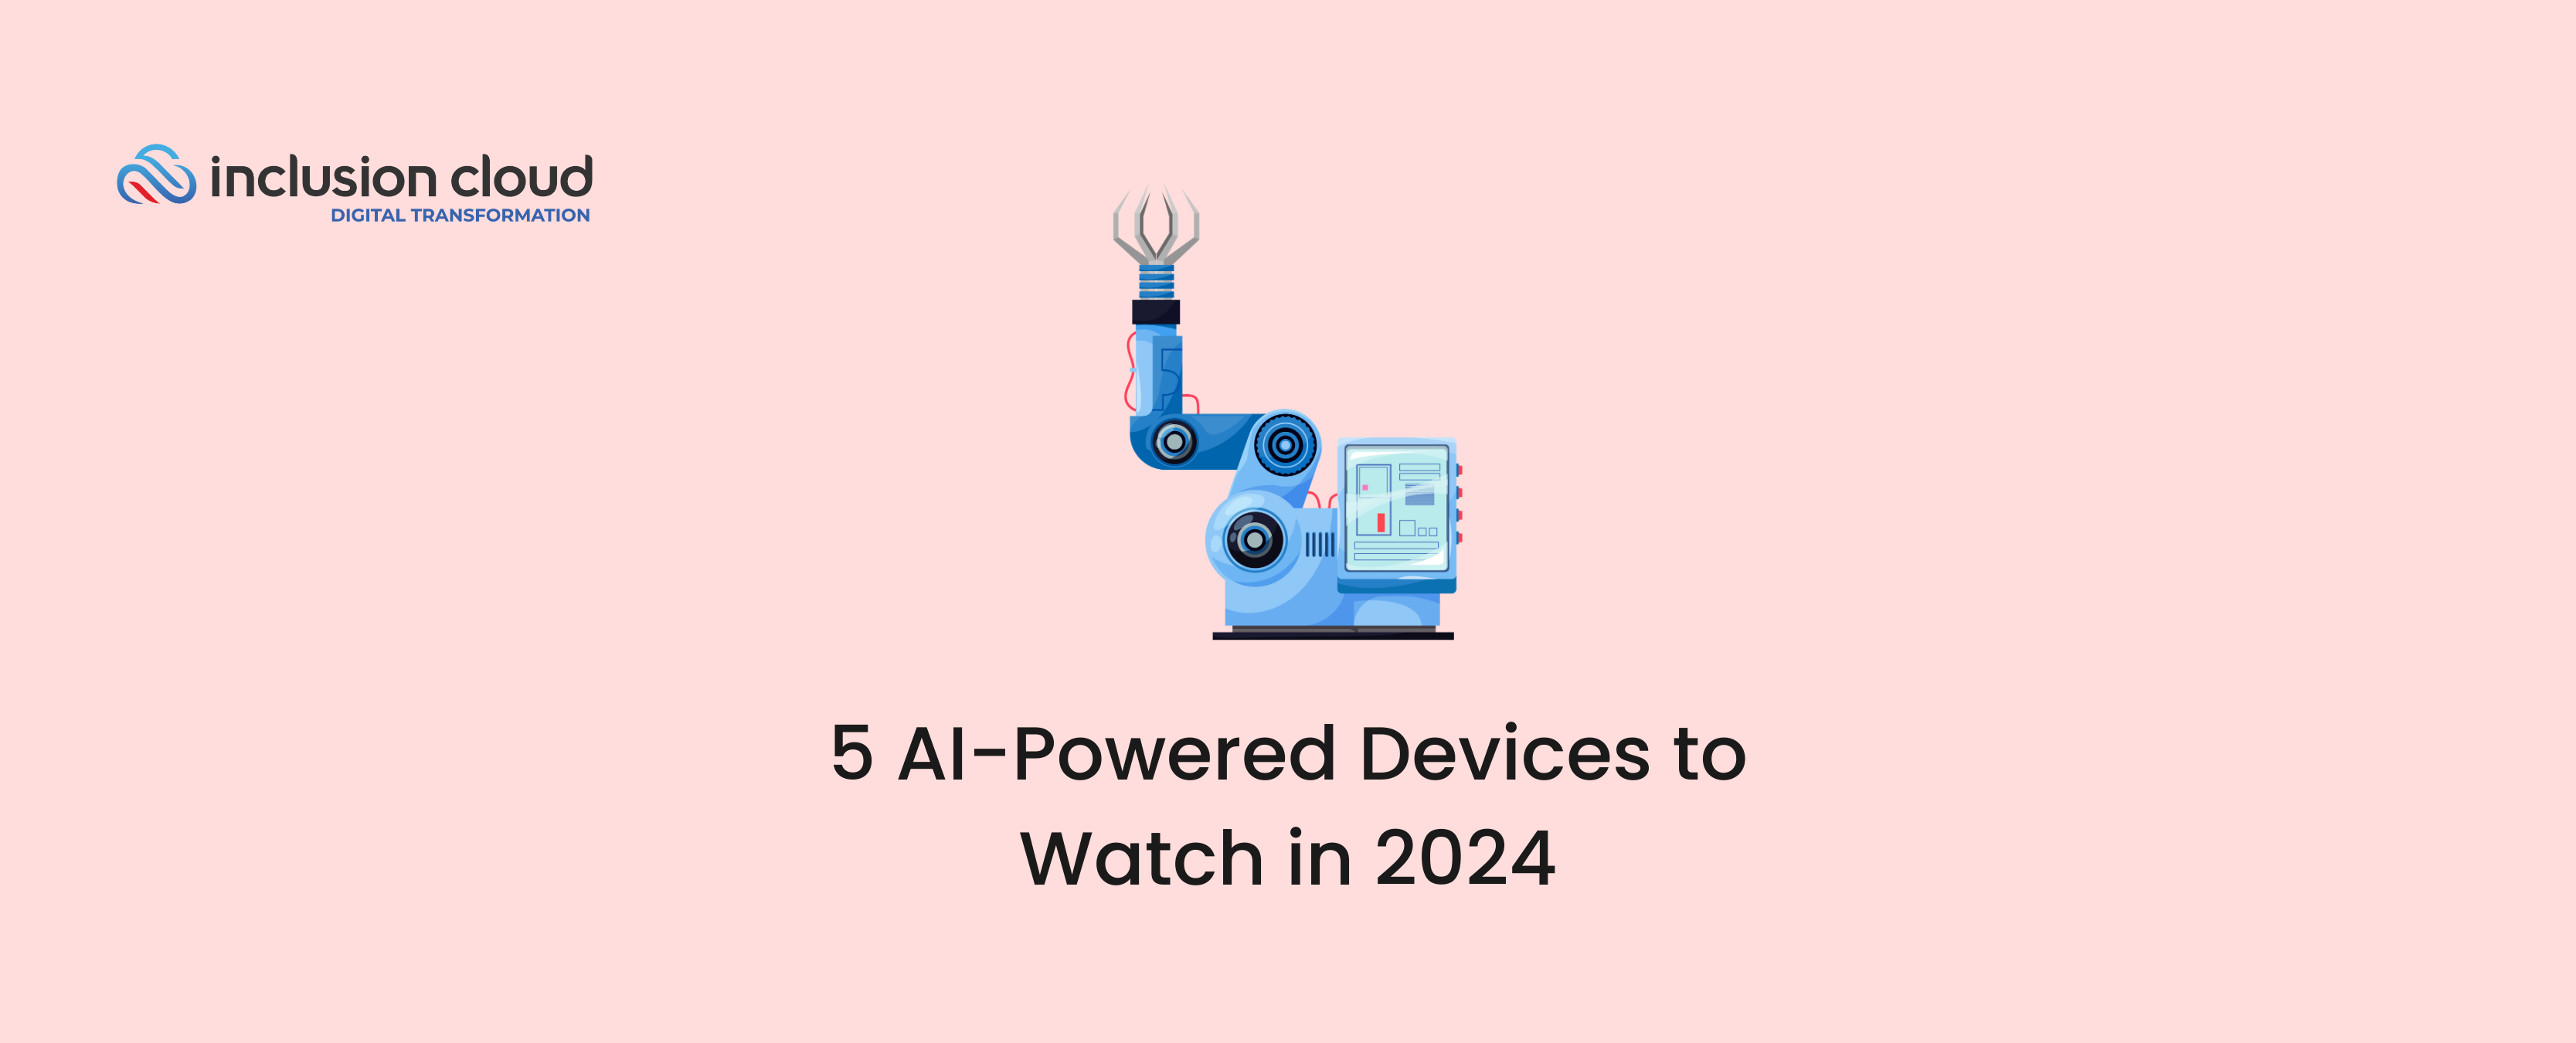 5 AI-Powered Devices to Watch in 2024